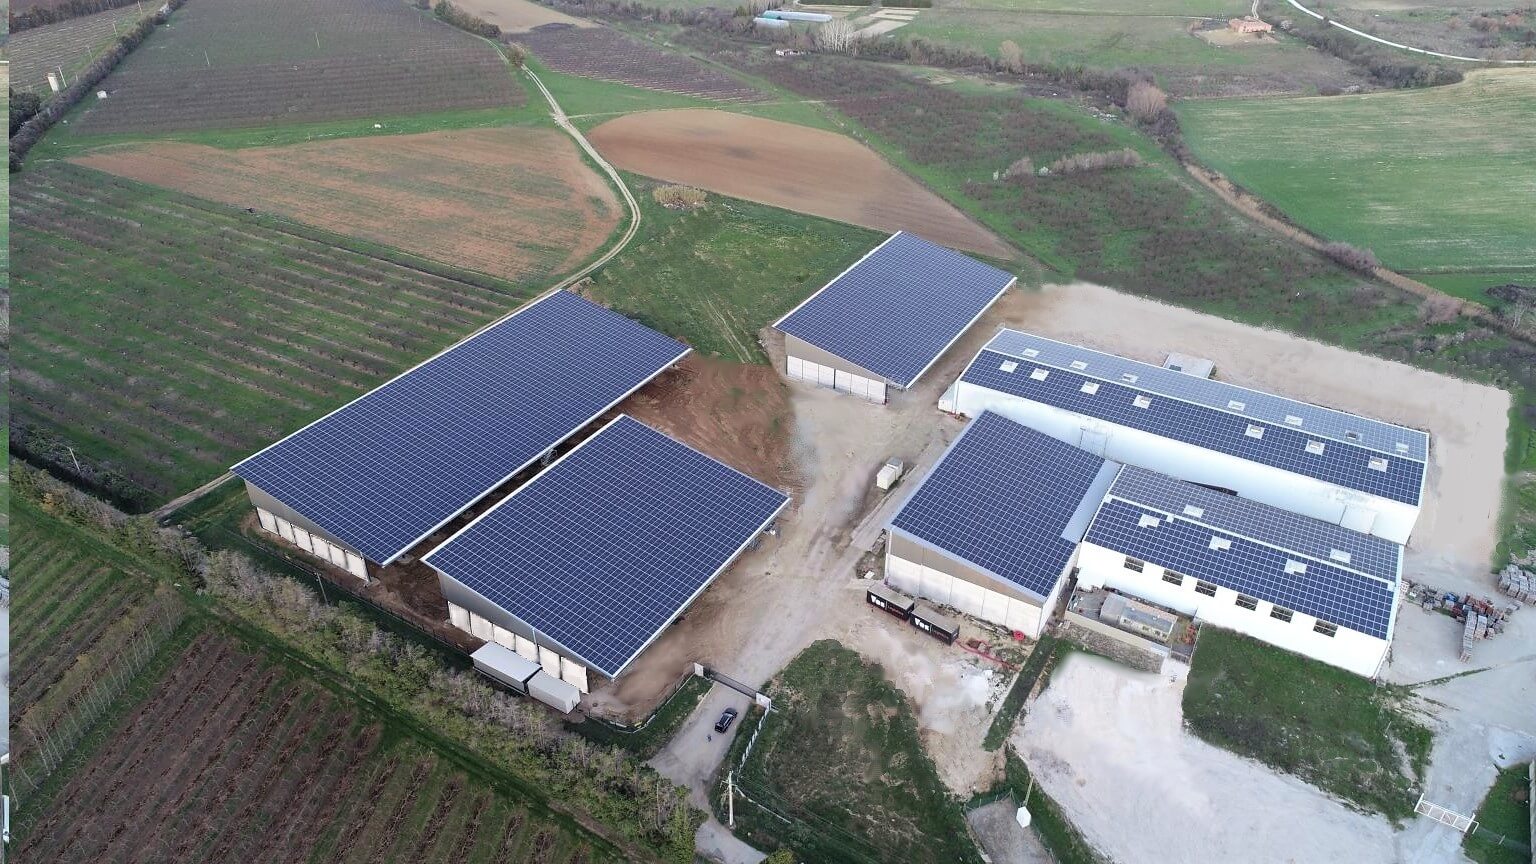 Douliere hay france factory aerial view on the solar panel system